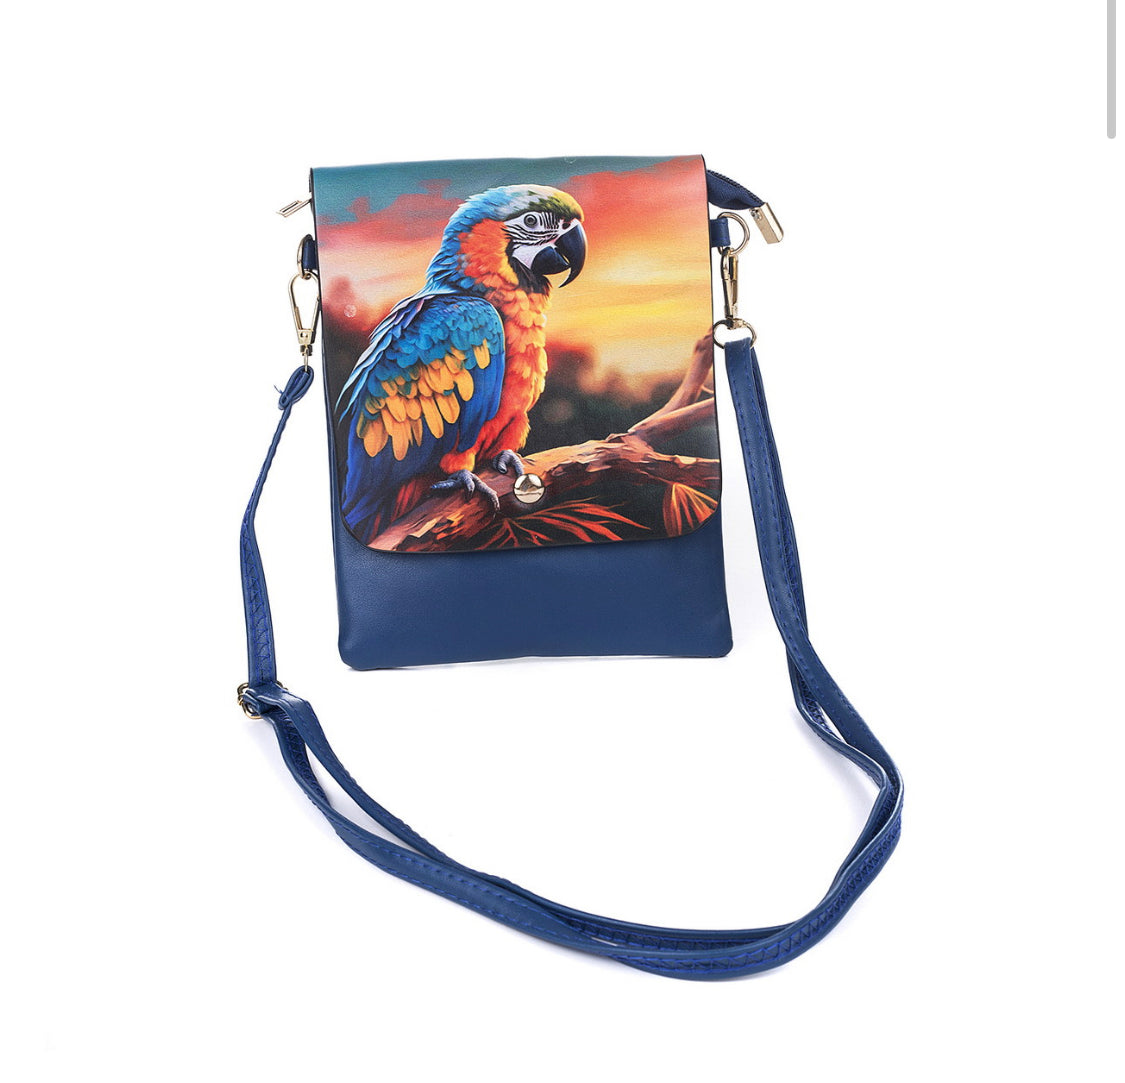 Crossbody Bag with straps - zippered - parrot design